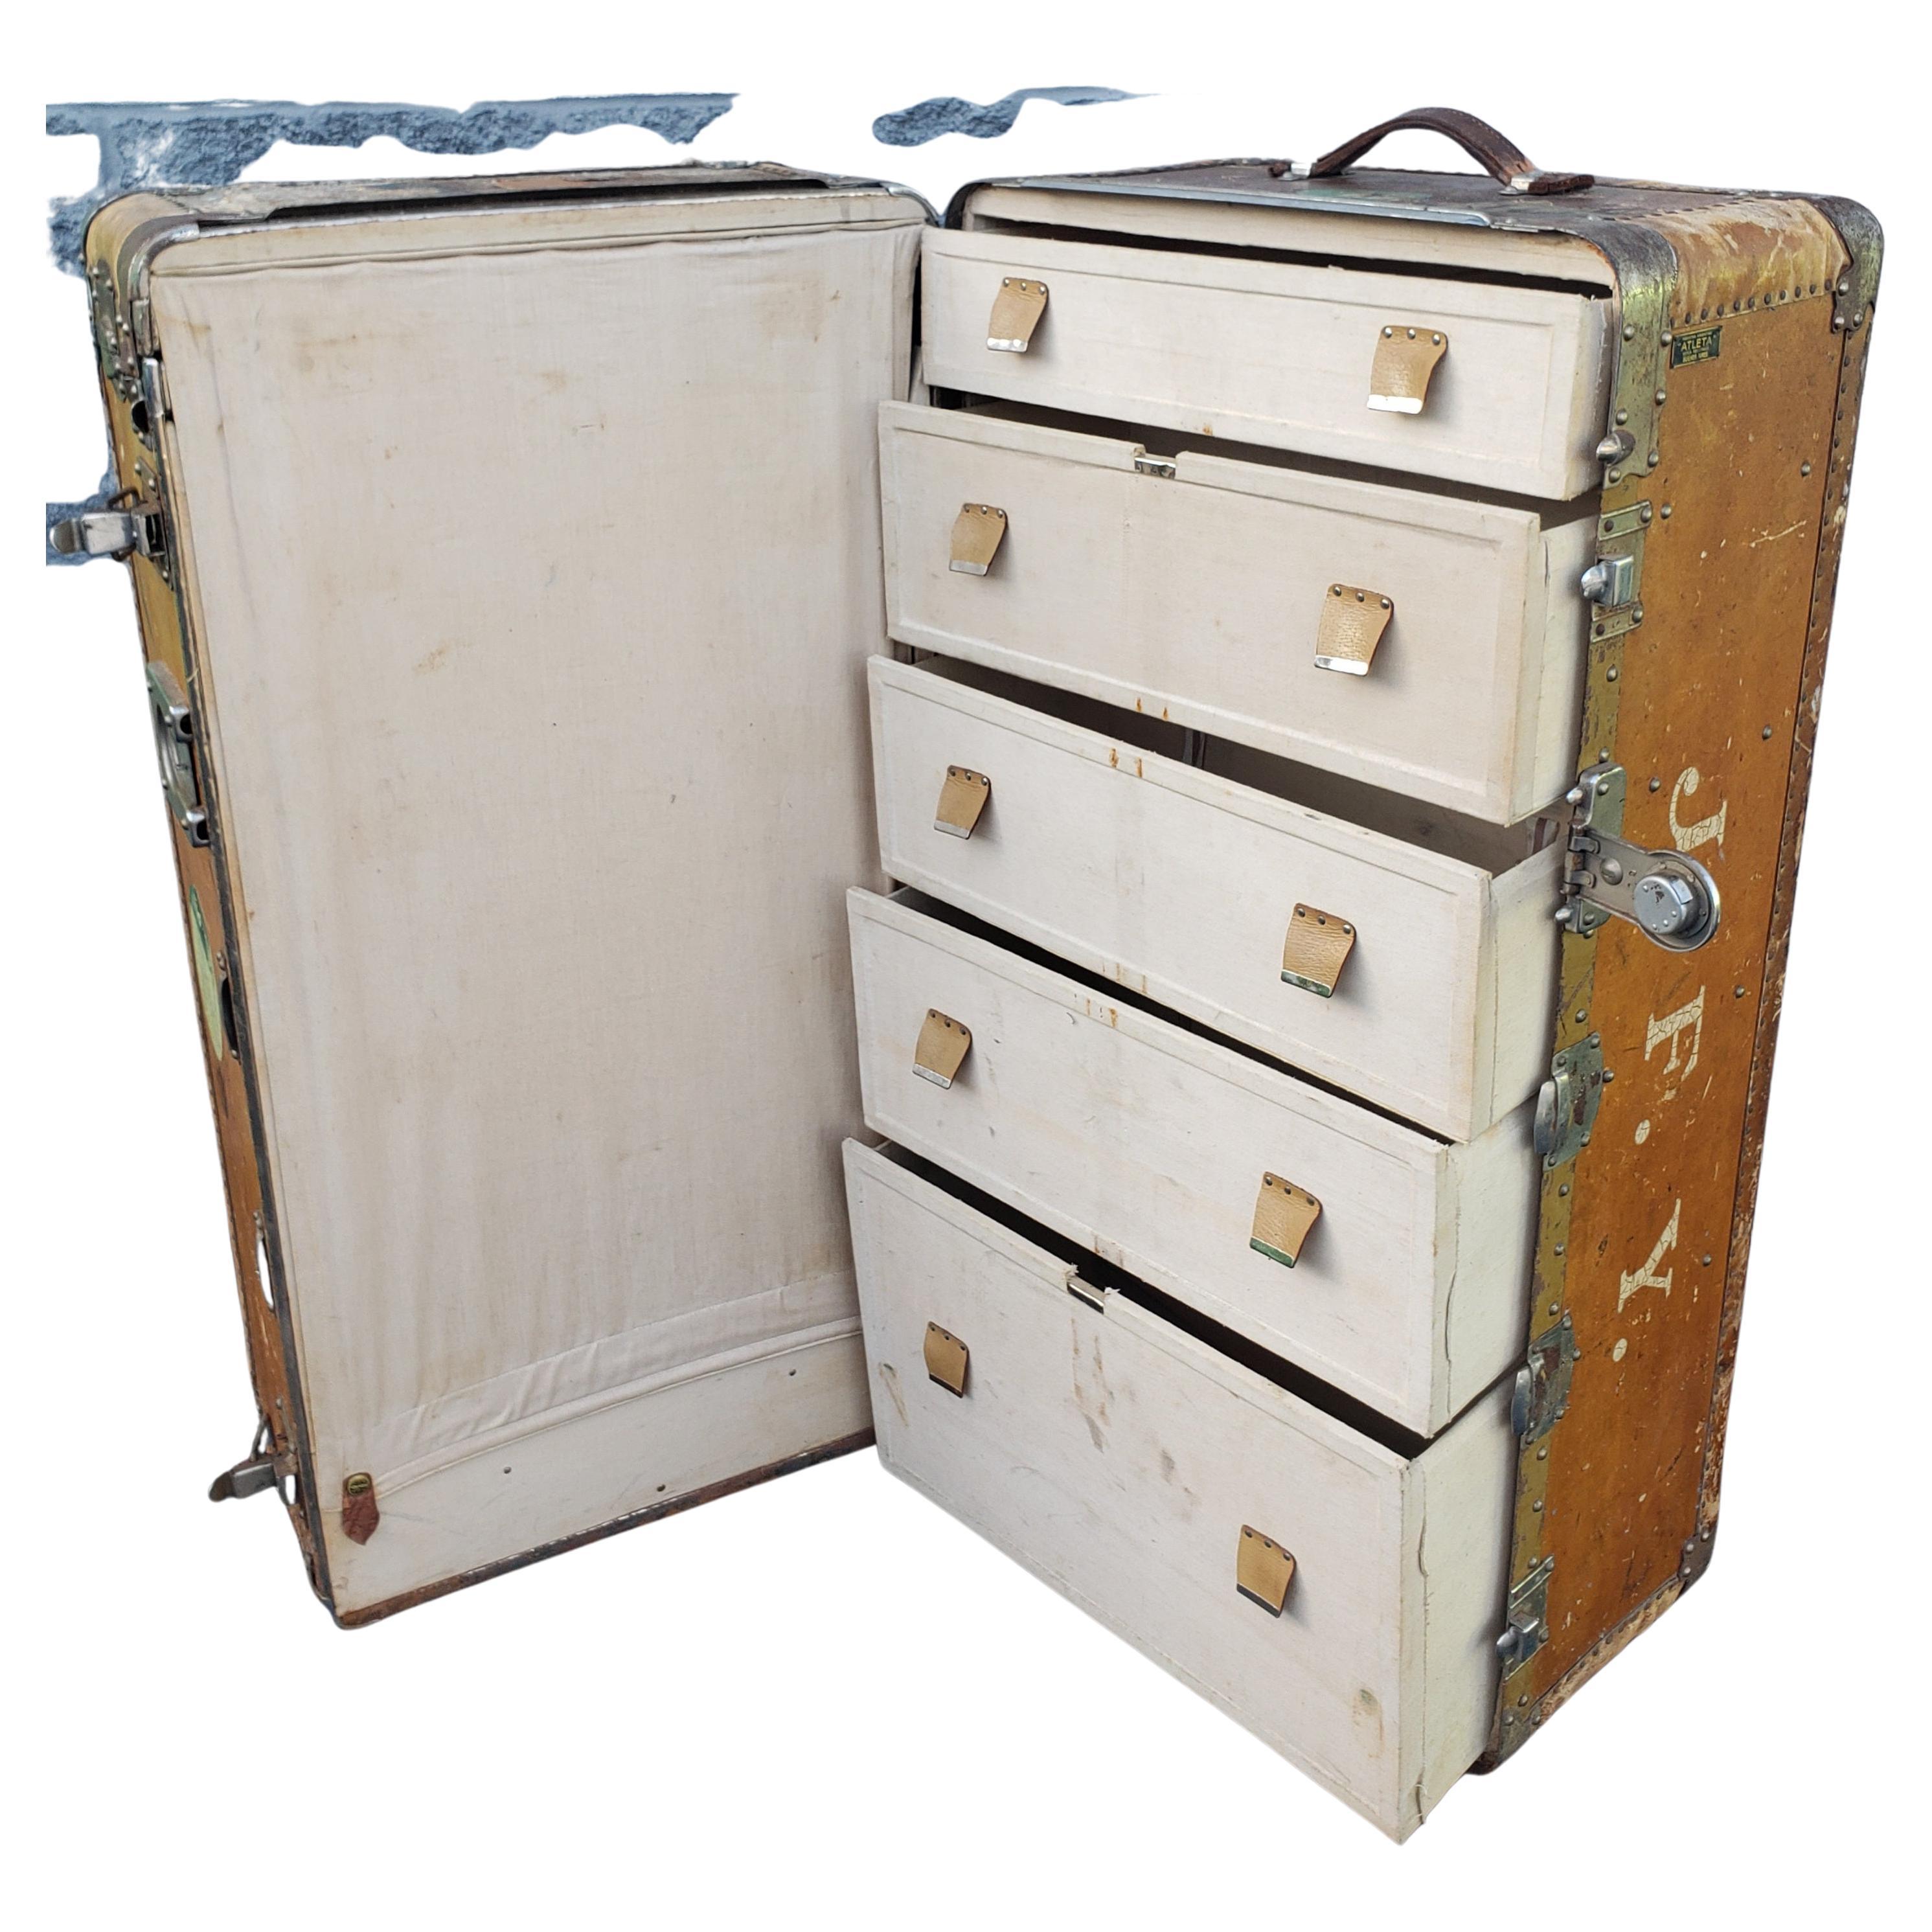 antique steamer trunk with drawers and hangers